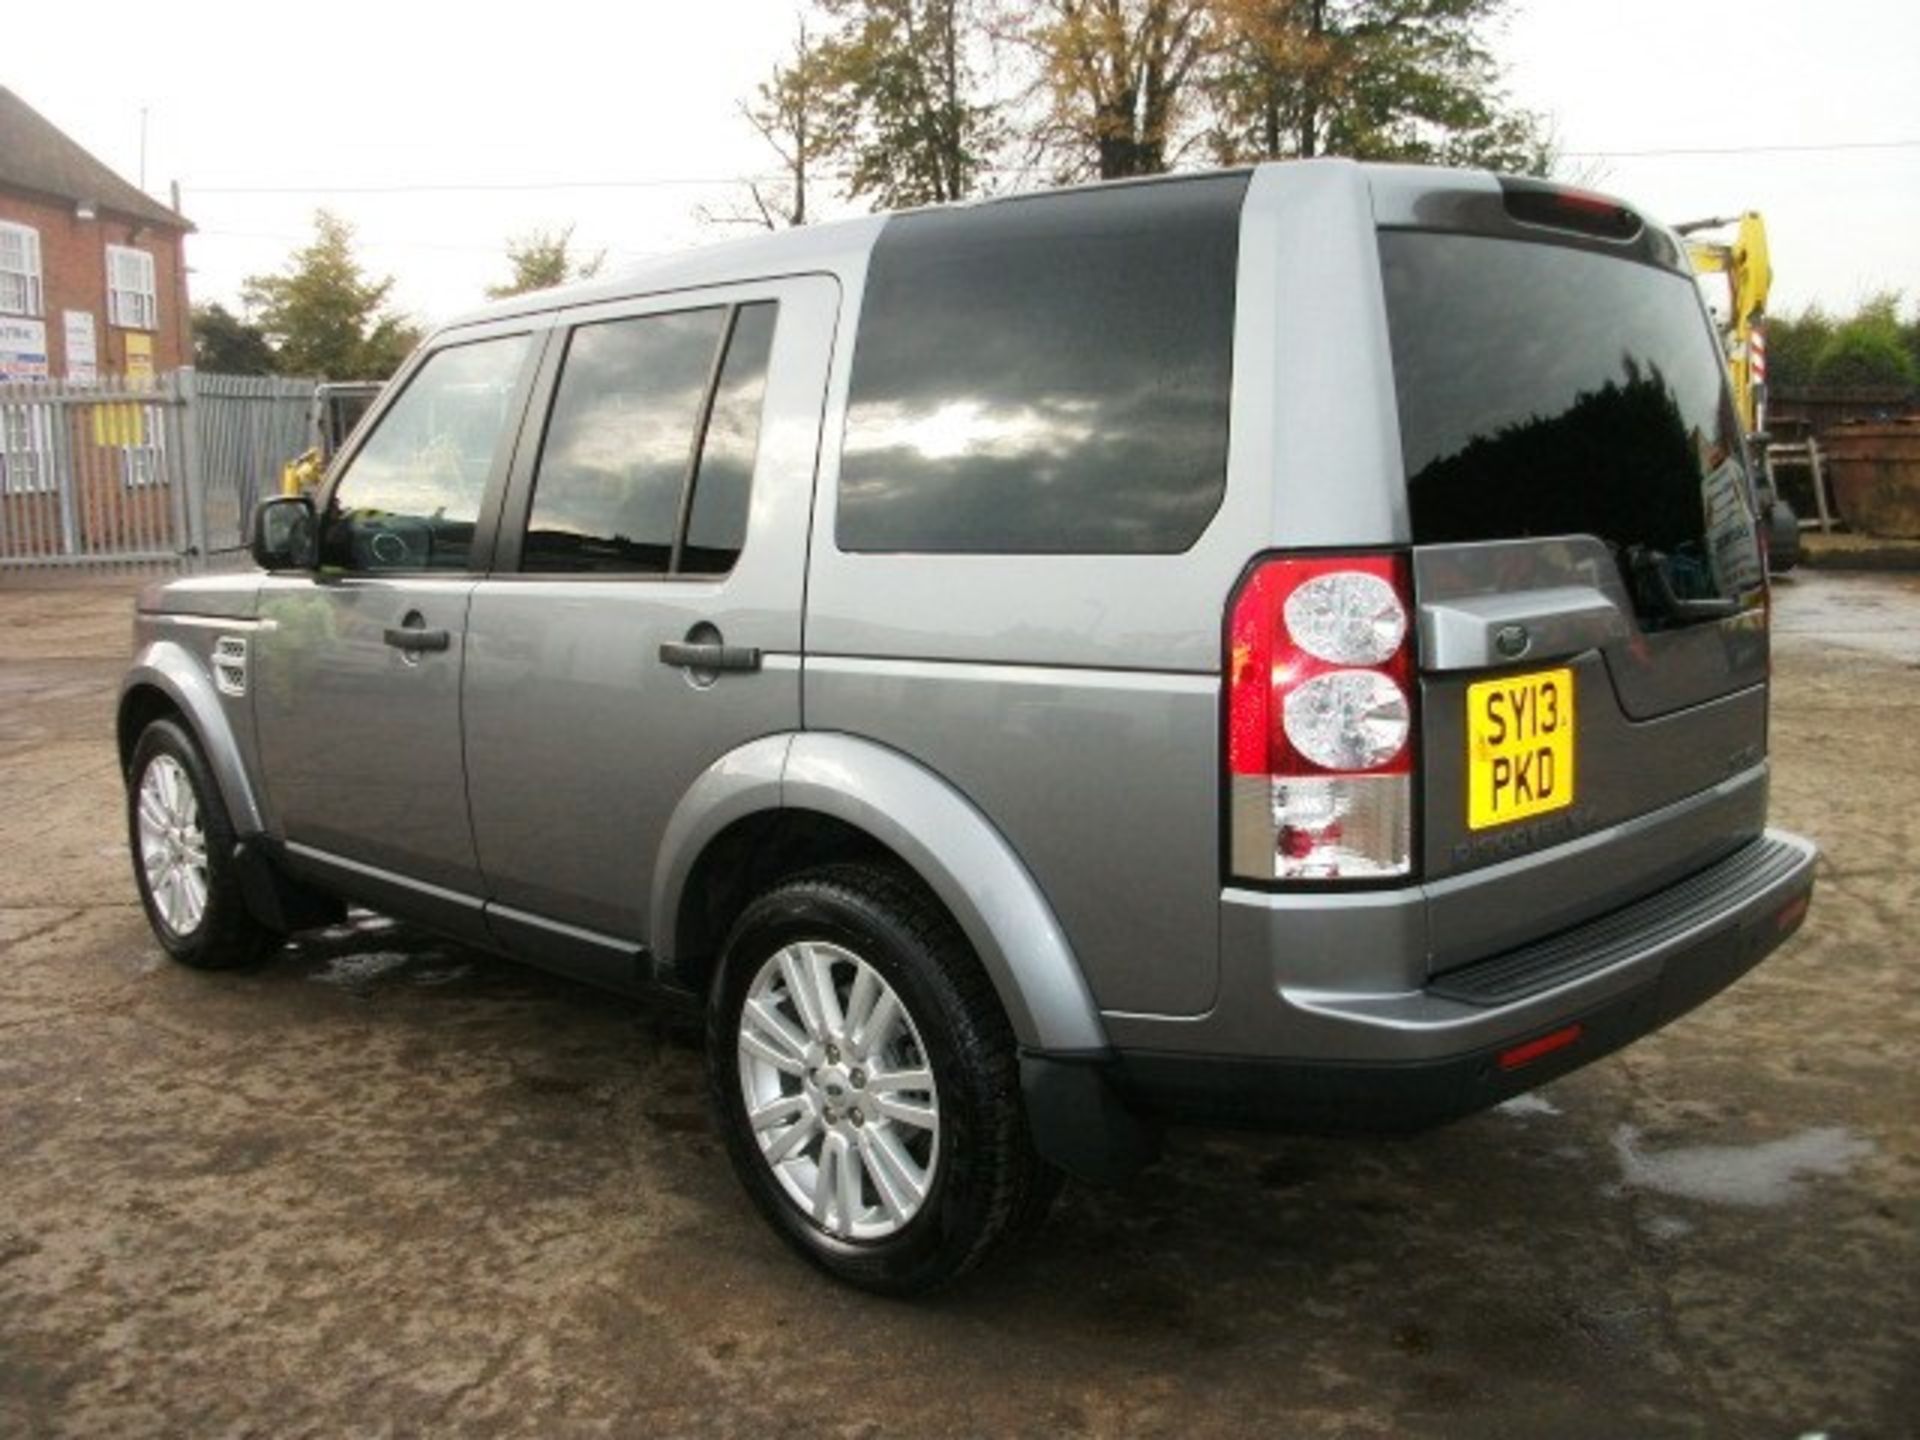 LAND ROVER DISCOVERY SDV6 AUTO 255 - 2993cc
Body: 4 Dr 4x4
Color: Grey
First Reg: 26/04/2013 - Image 2 of 29